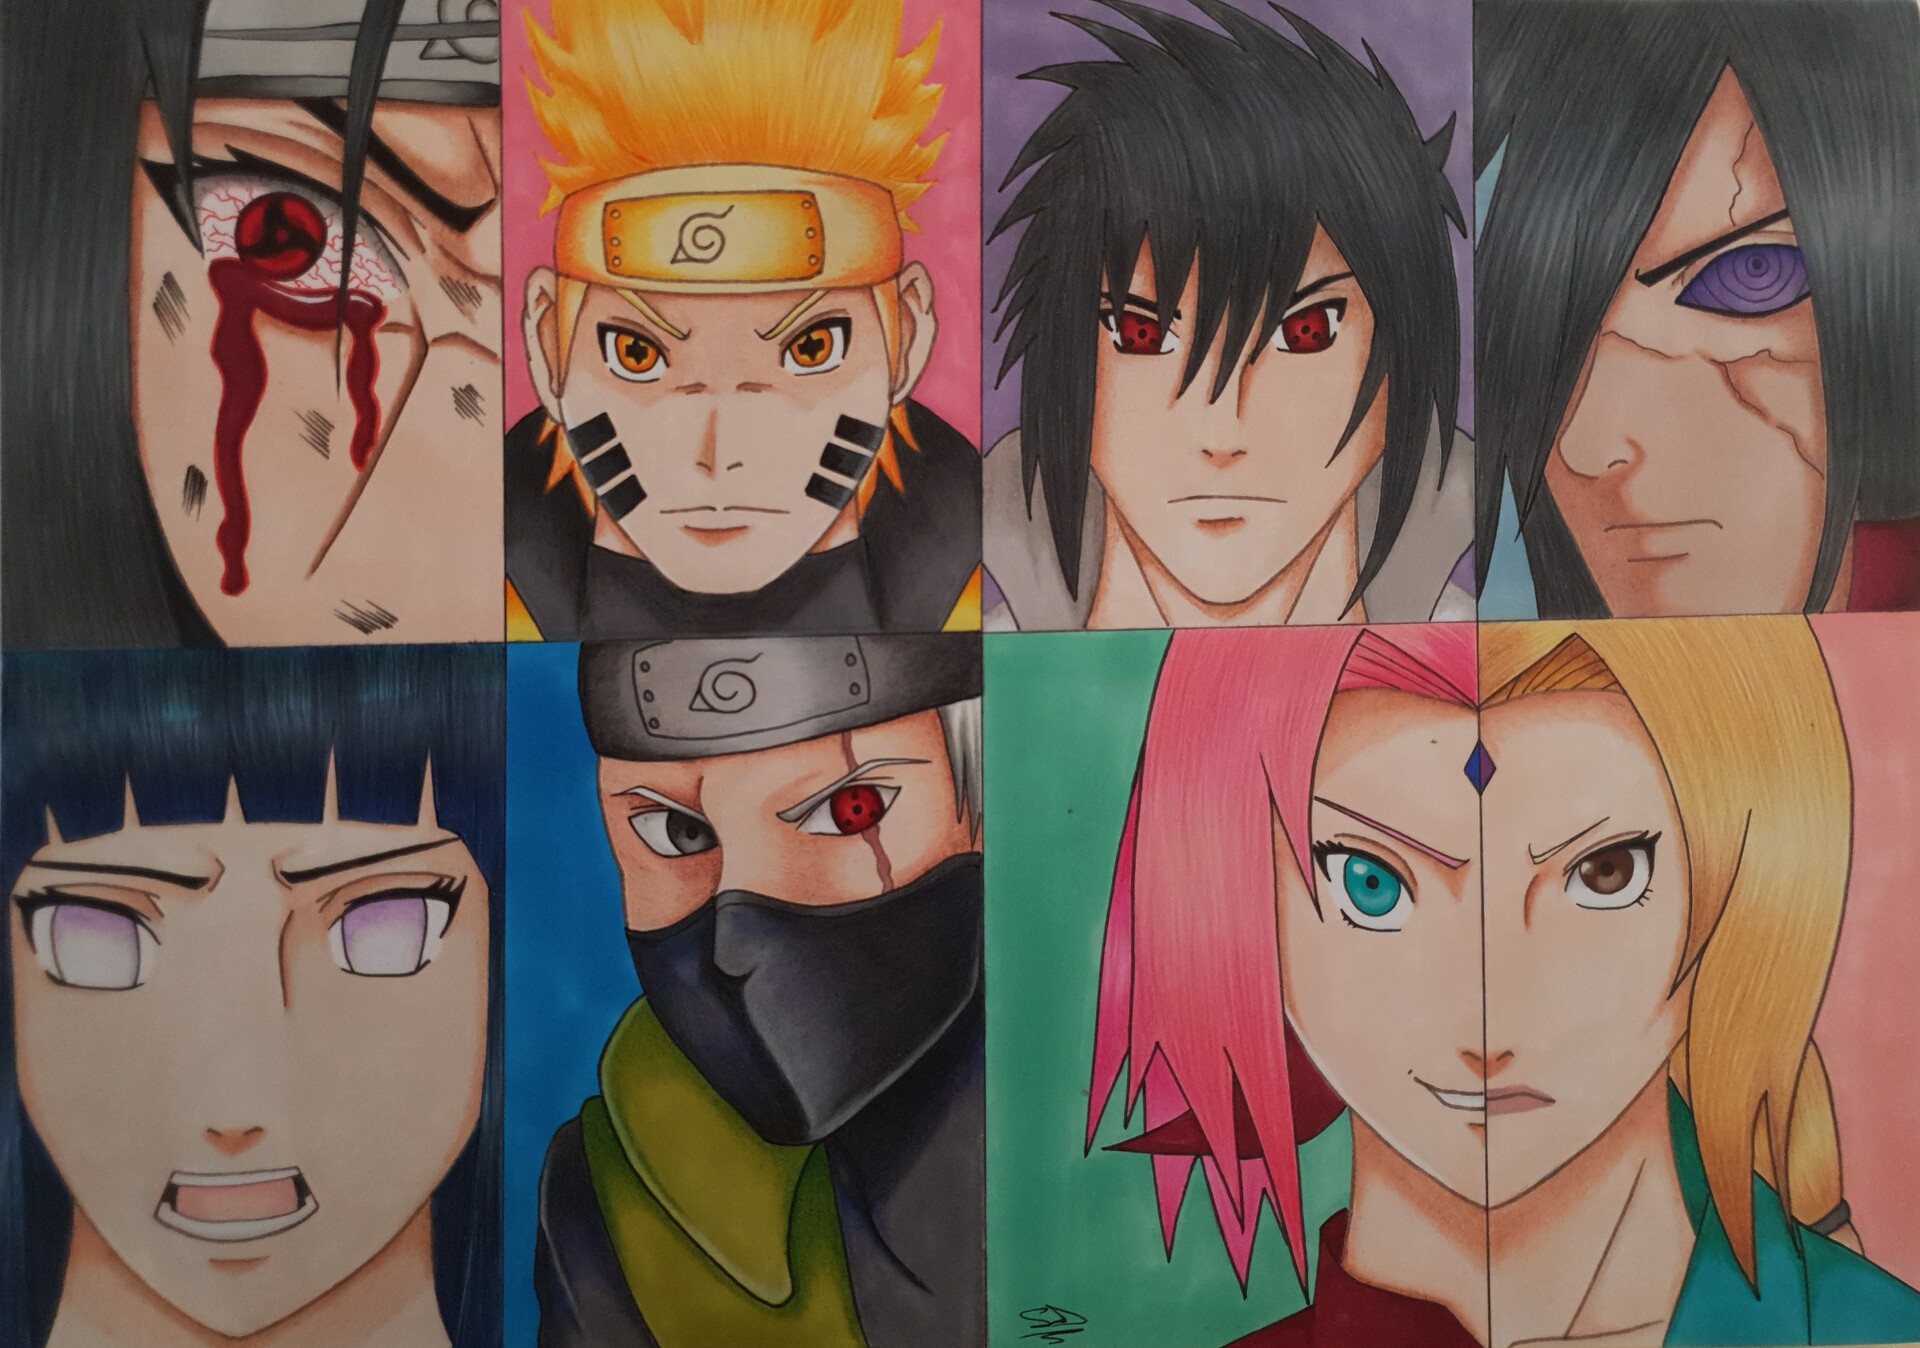 ArtStation - just some drawings of characters from the anime naruto